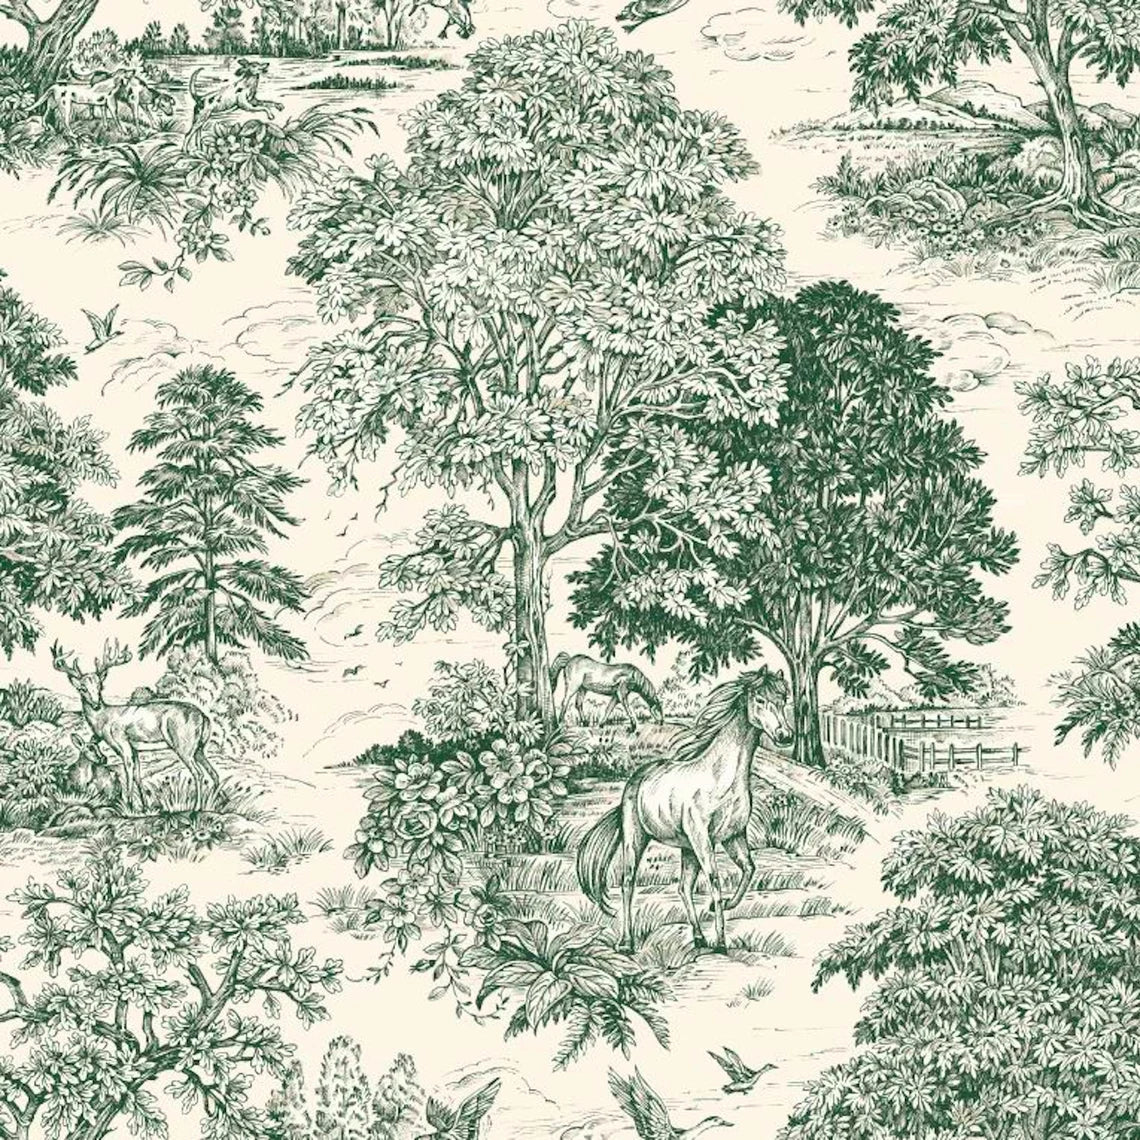 pillow sham in Yellowstone Classic Green Country Toile- Horses, Deer, Dogs- Large Scale